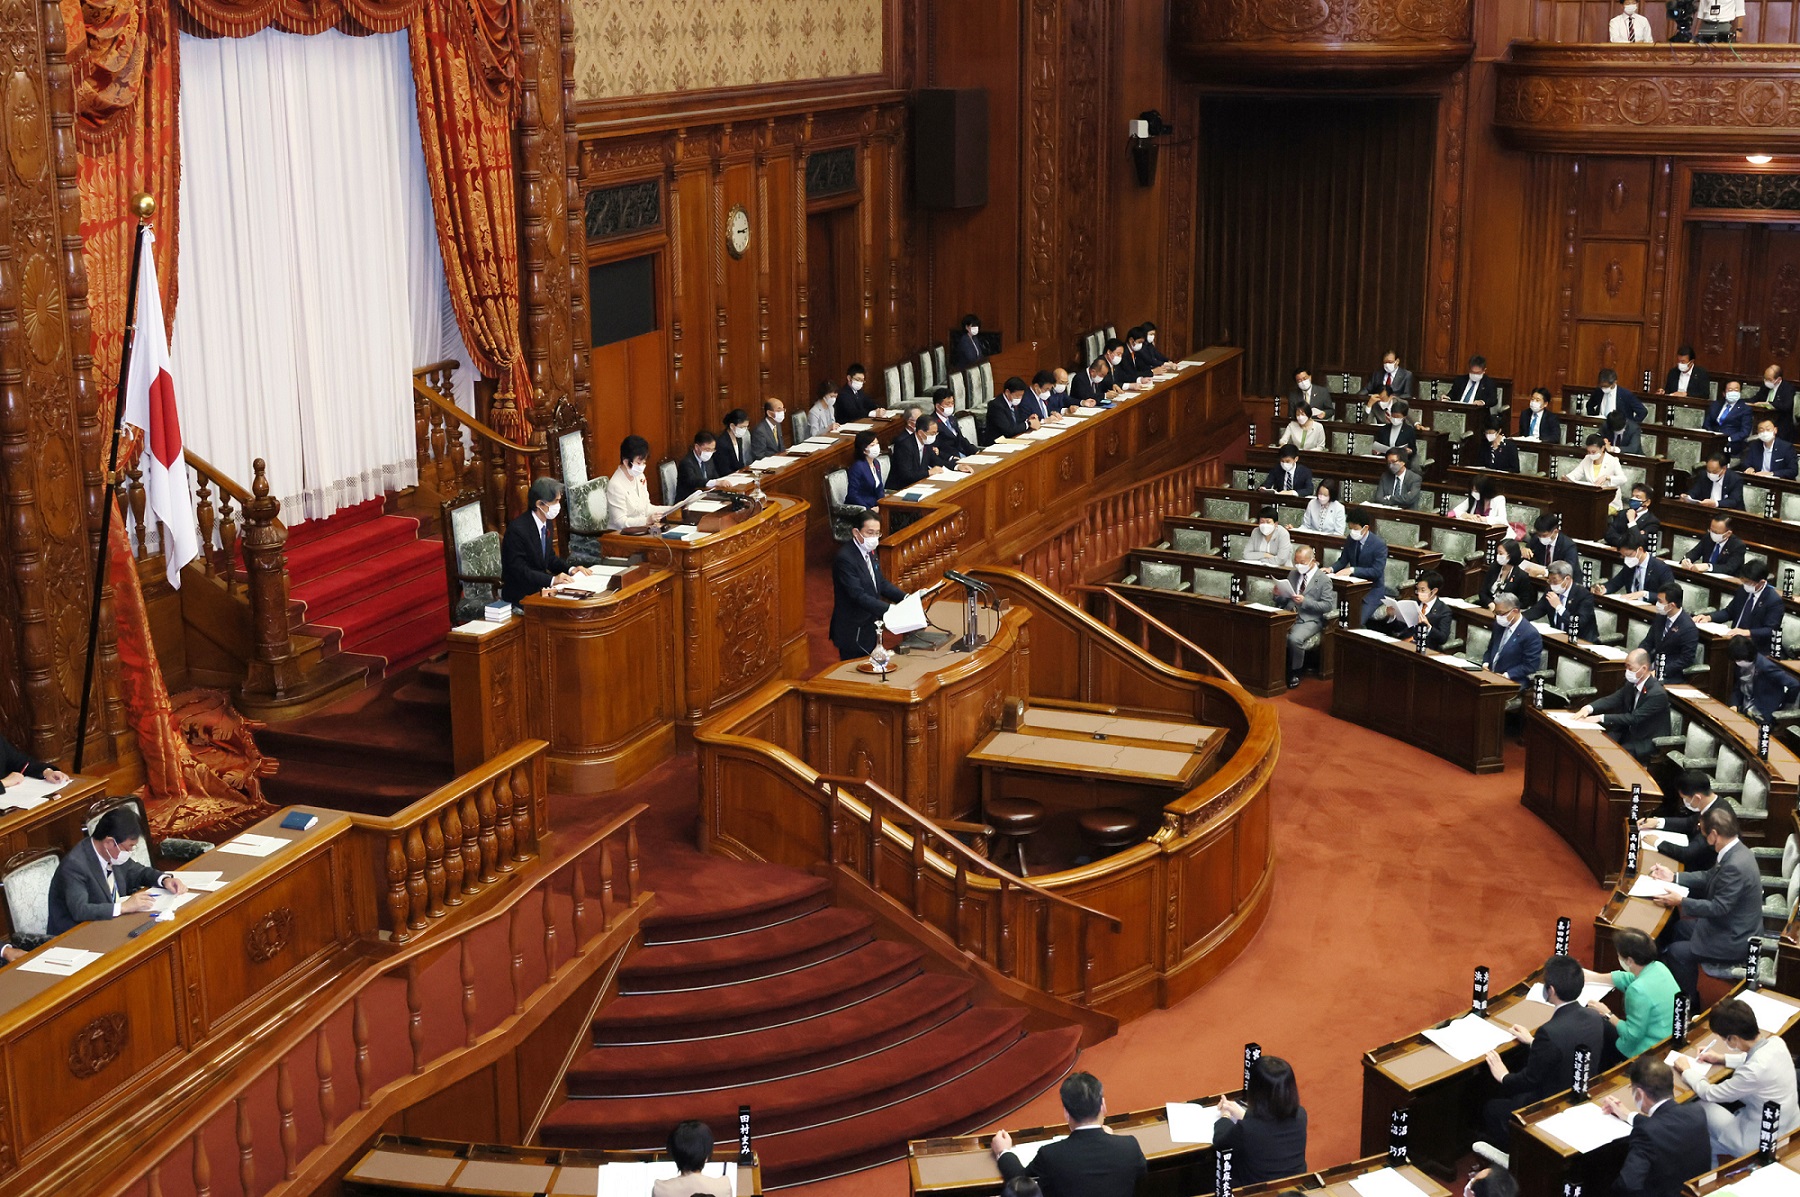 Photograph of the Prime Minister delivering a policy speech during a plenary session of the House of Representatives (13)